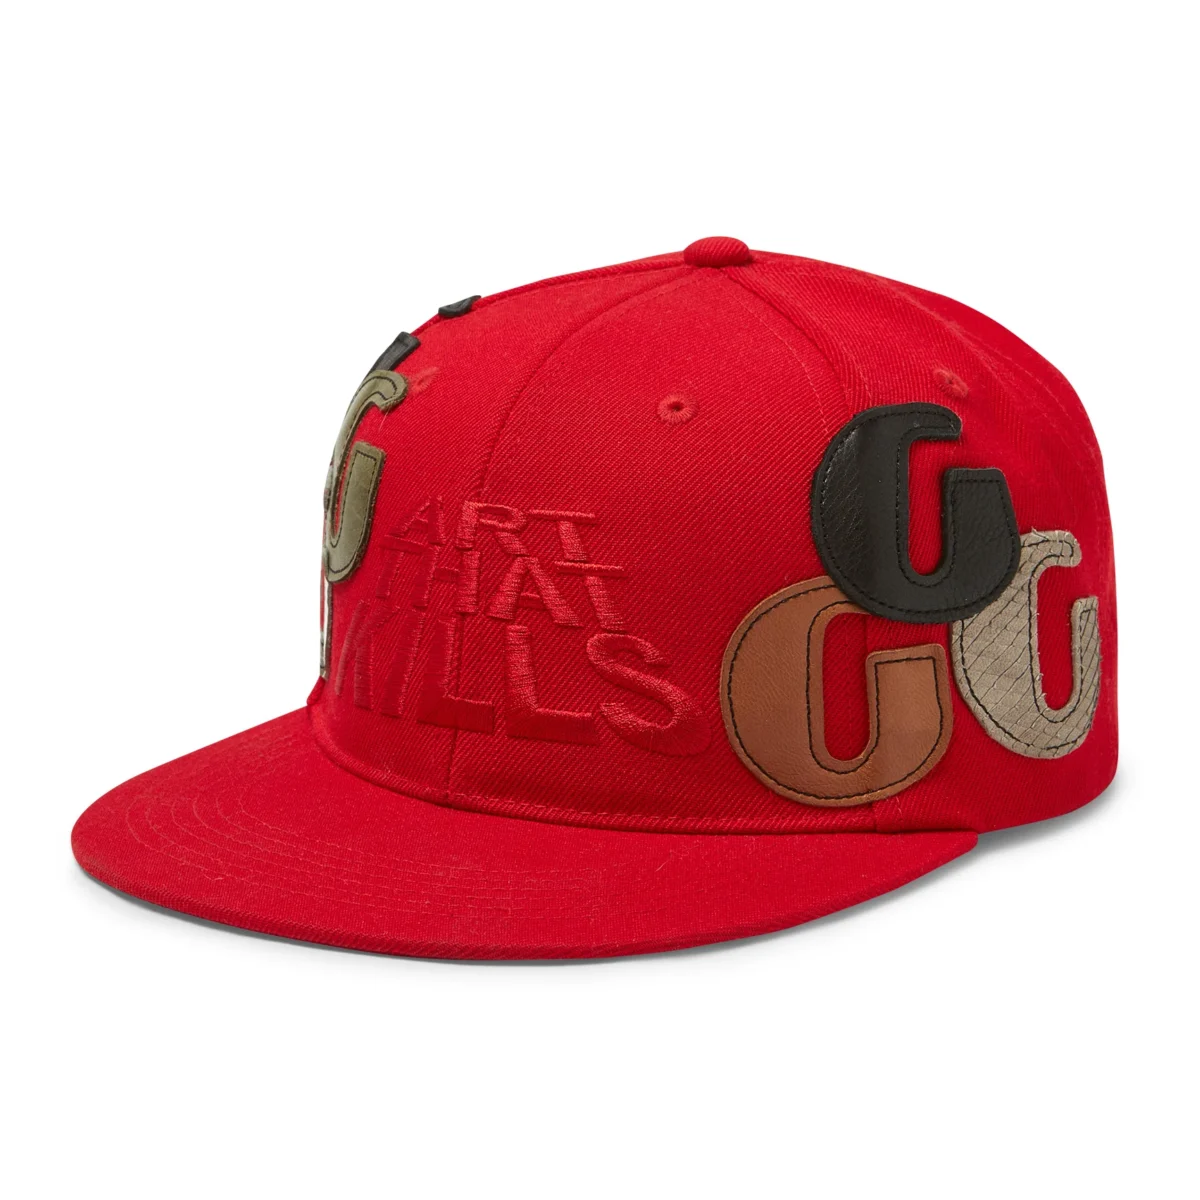 Atk G-Patch Fitted Cap